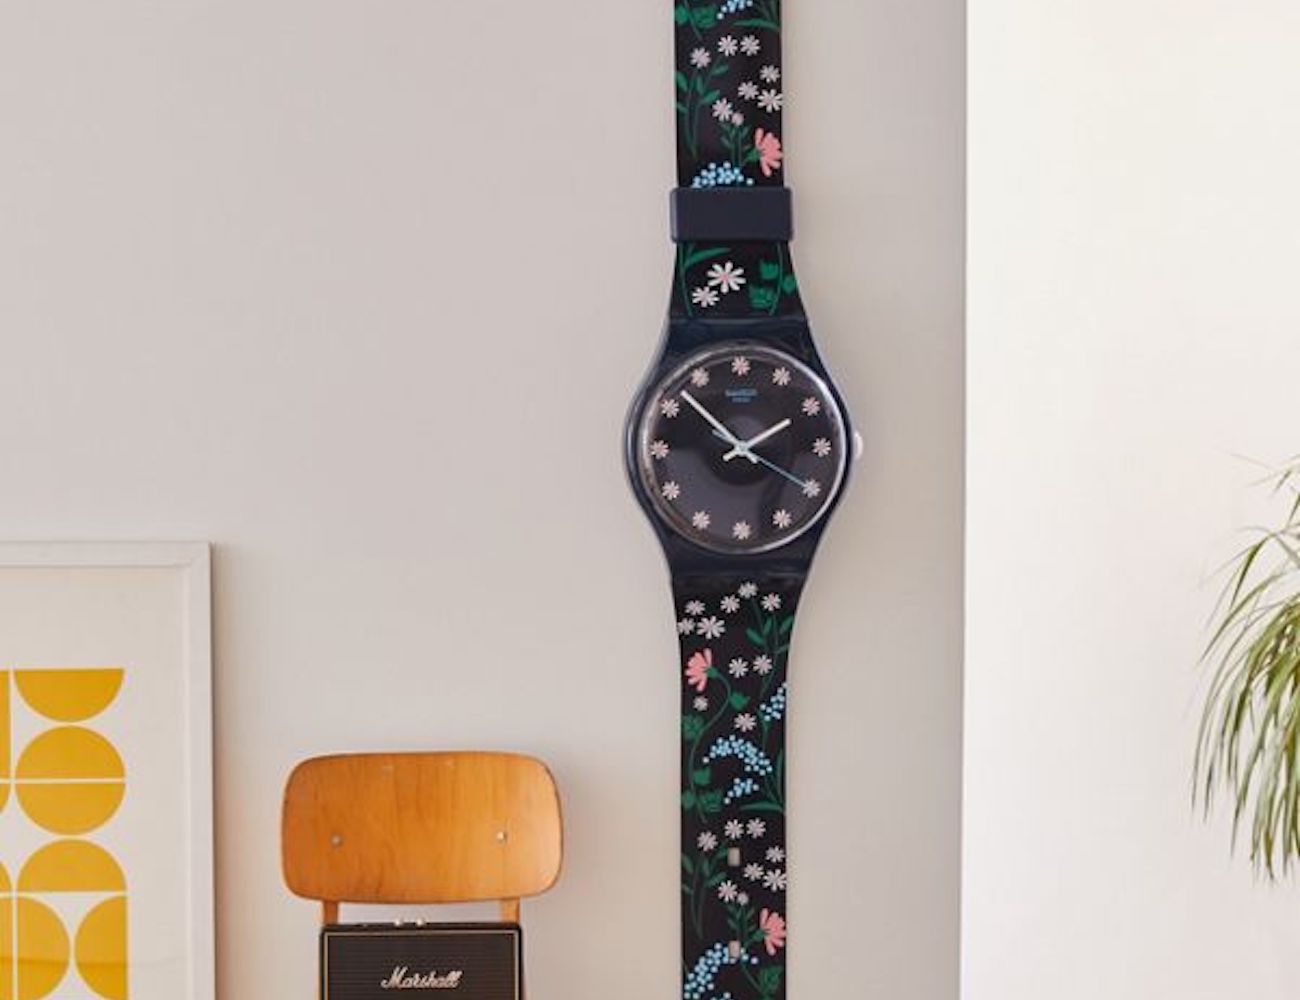 Swatch Maxi Wall Clocks Stand A Whopping 6 11 Tall